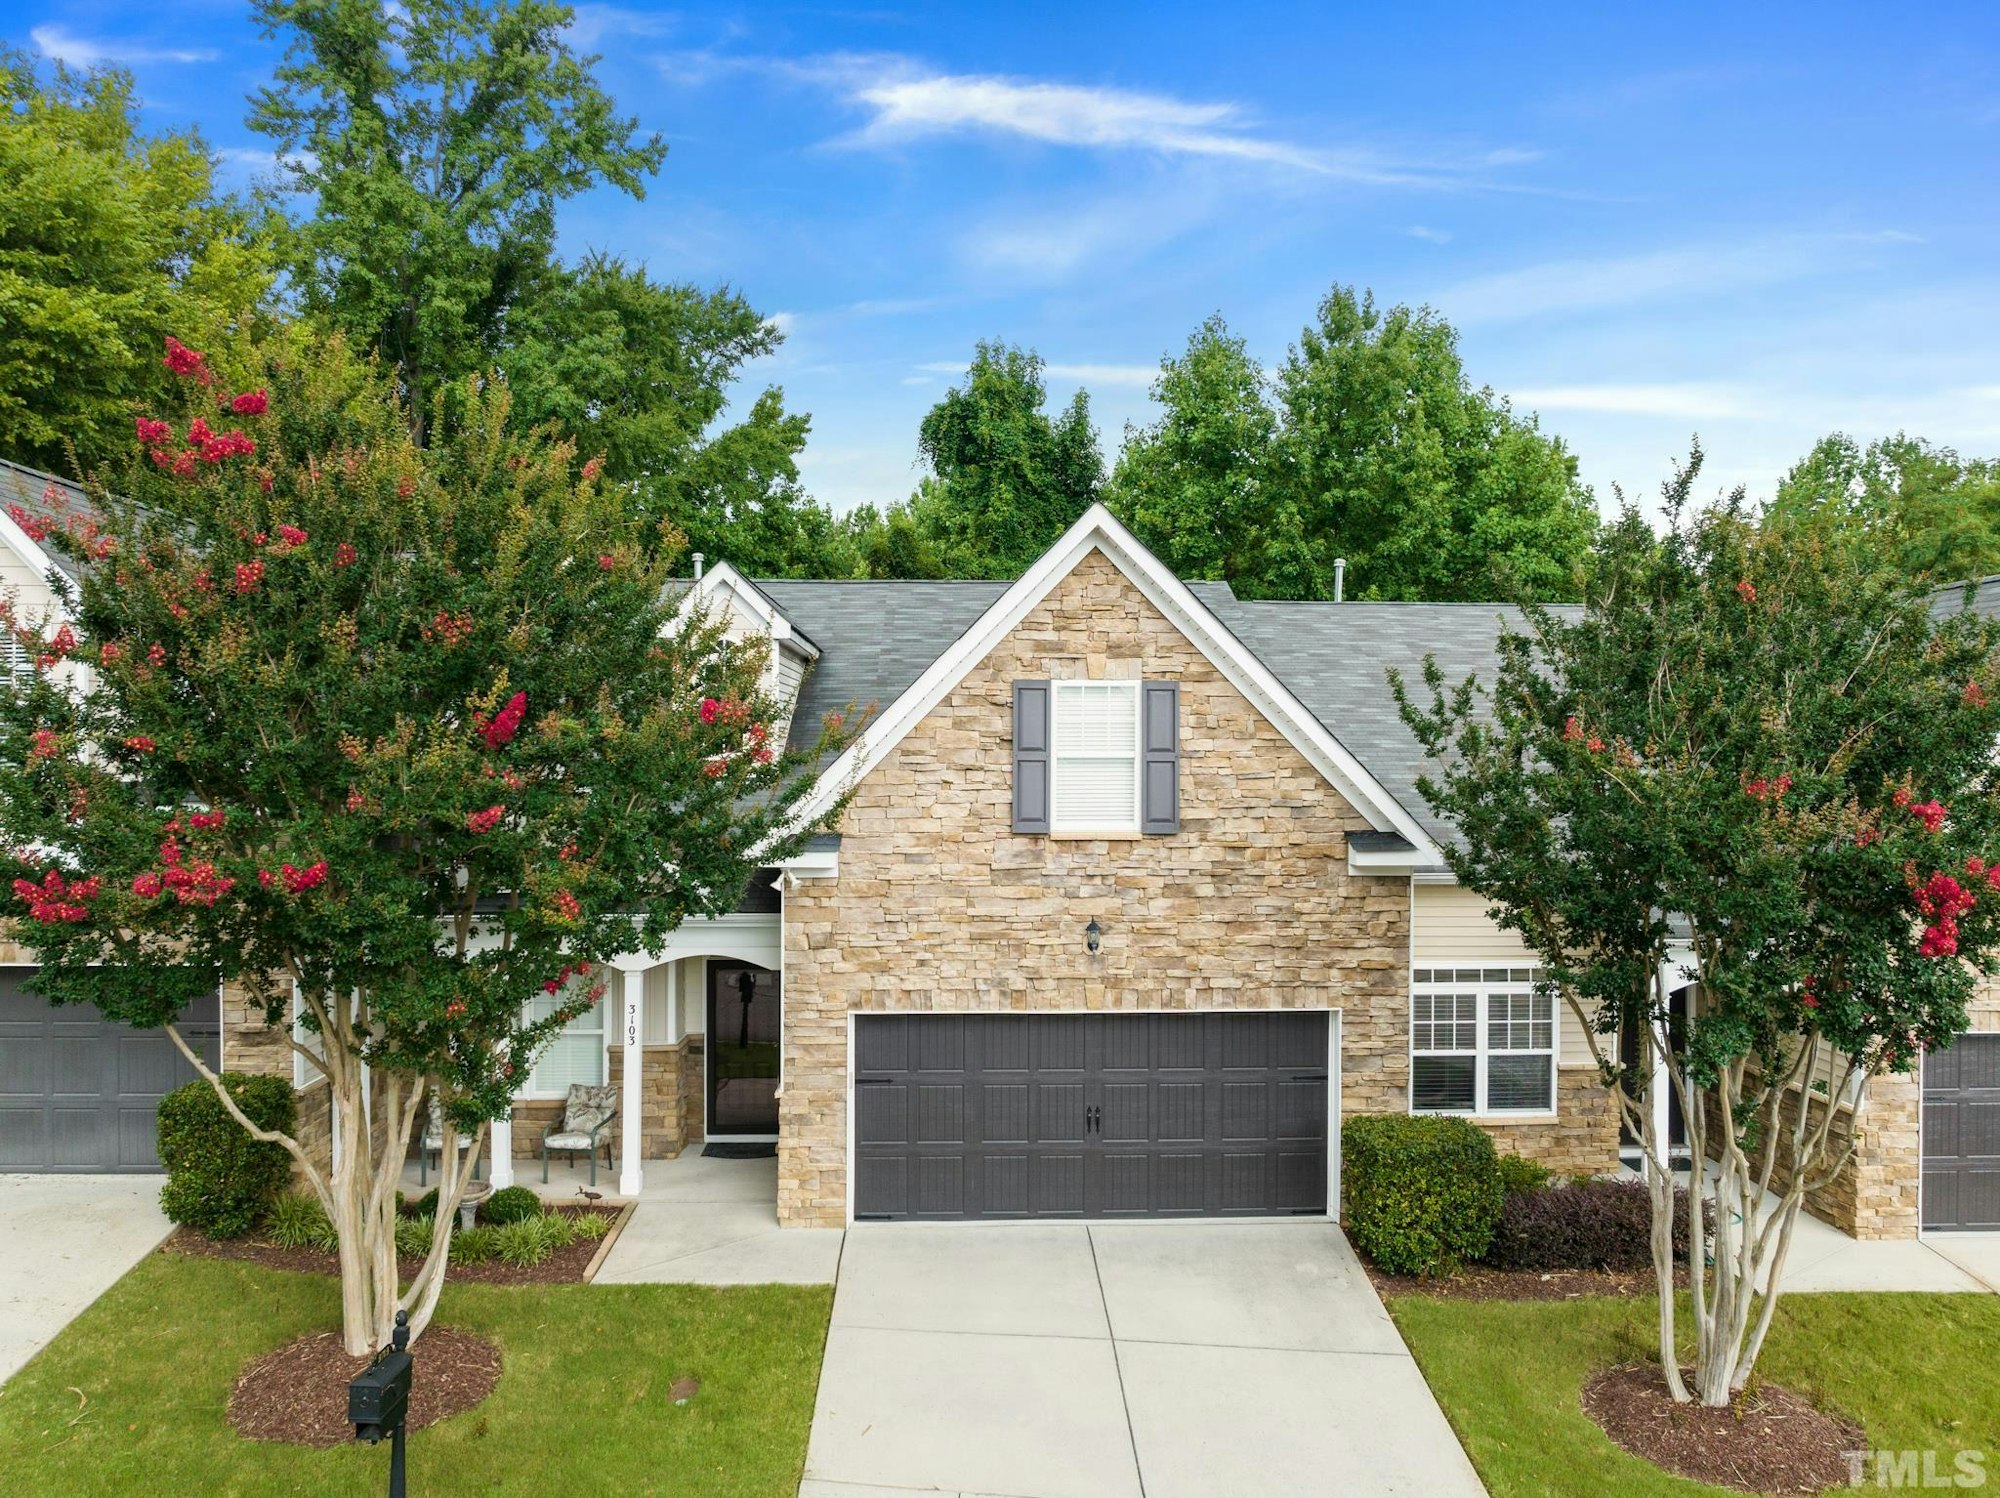 Photo 1 of 36 - 3103 Imperial Oaks Dr, Raleigh, NC 27614